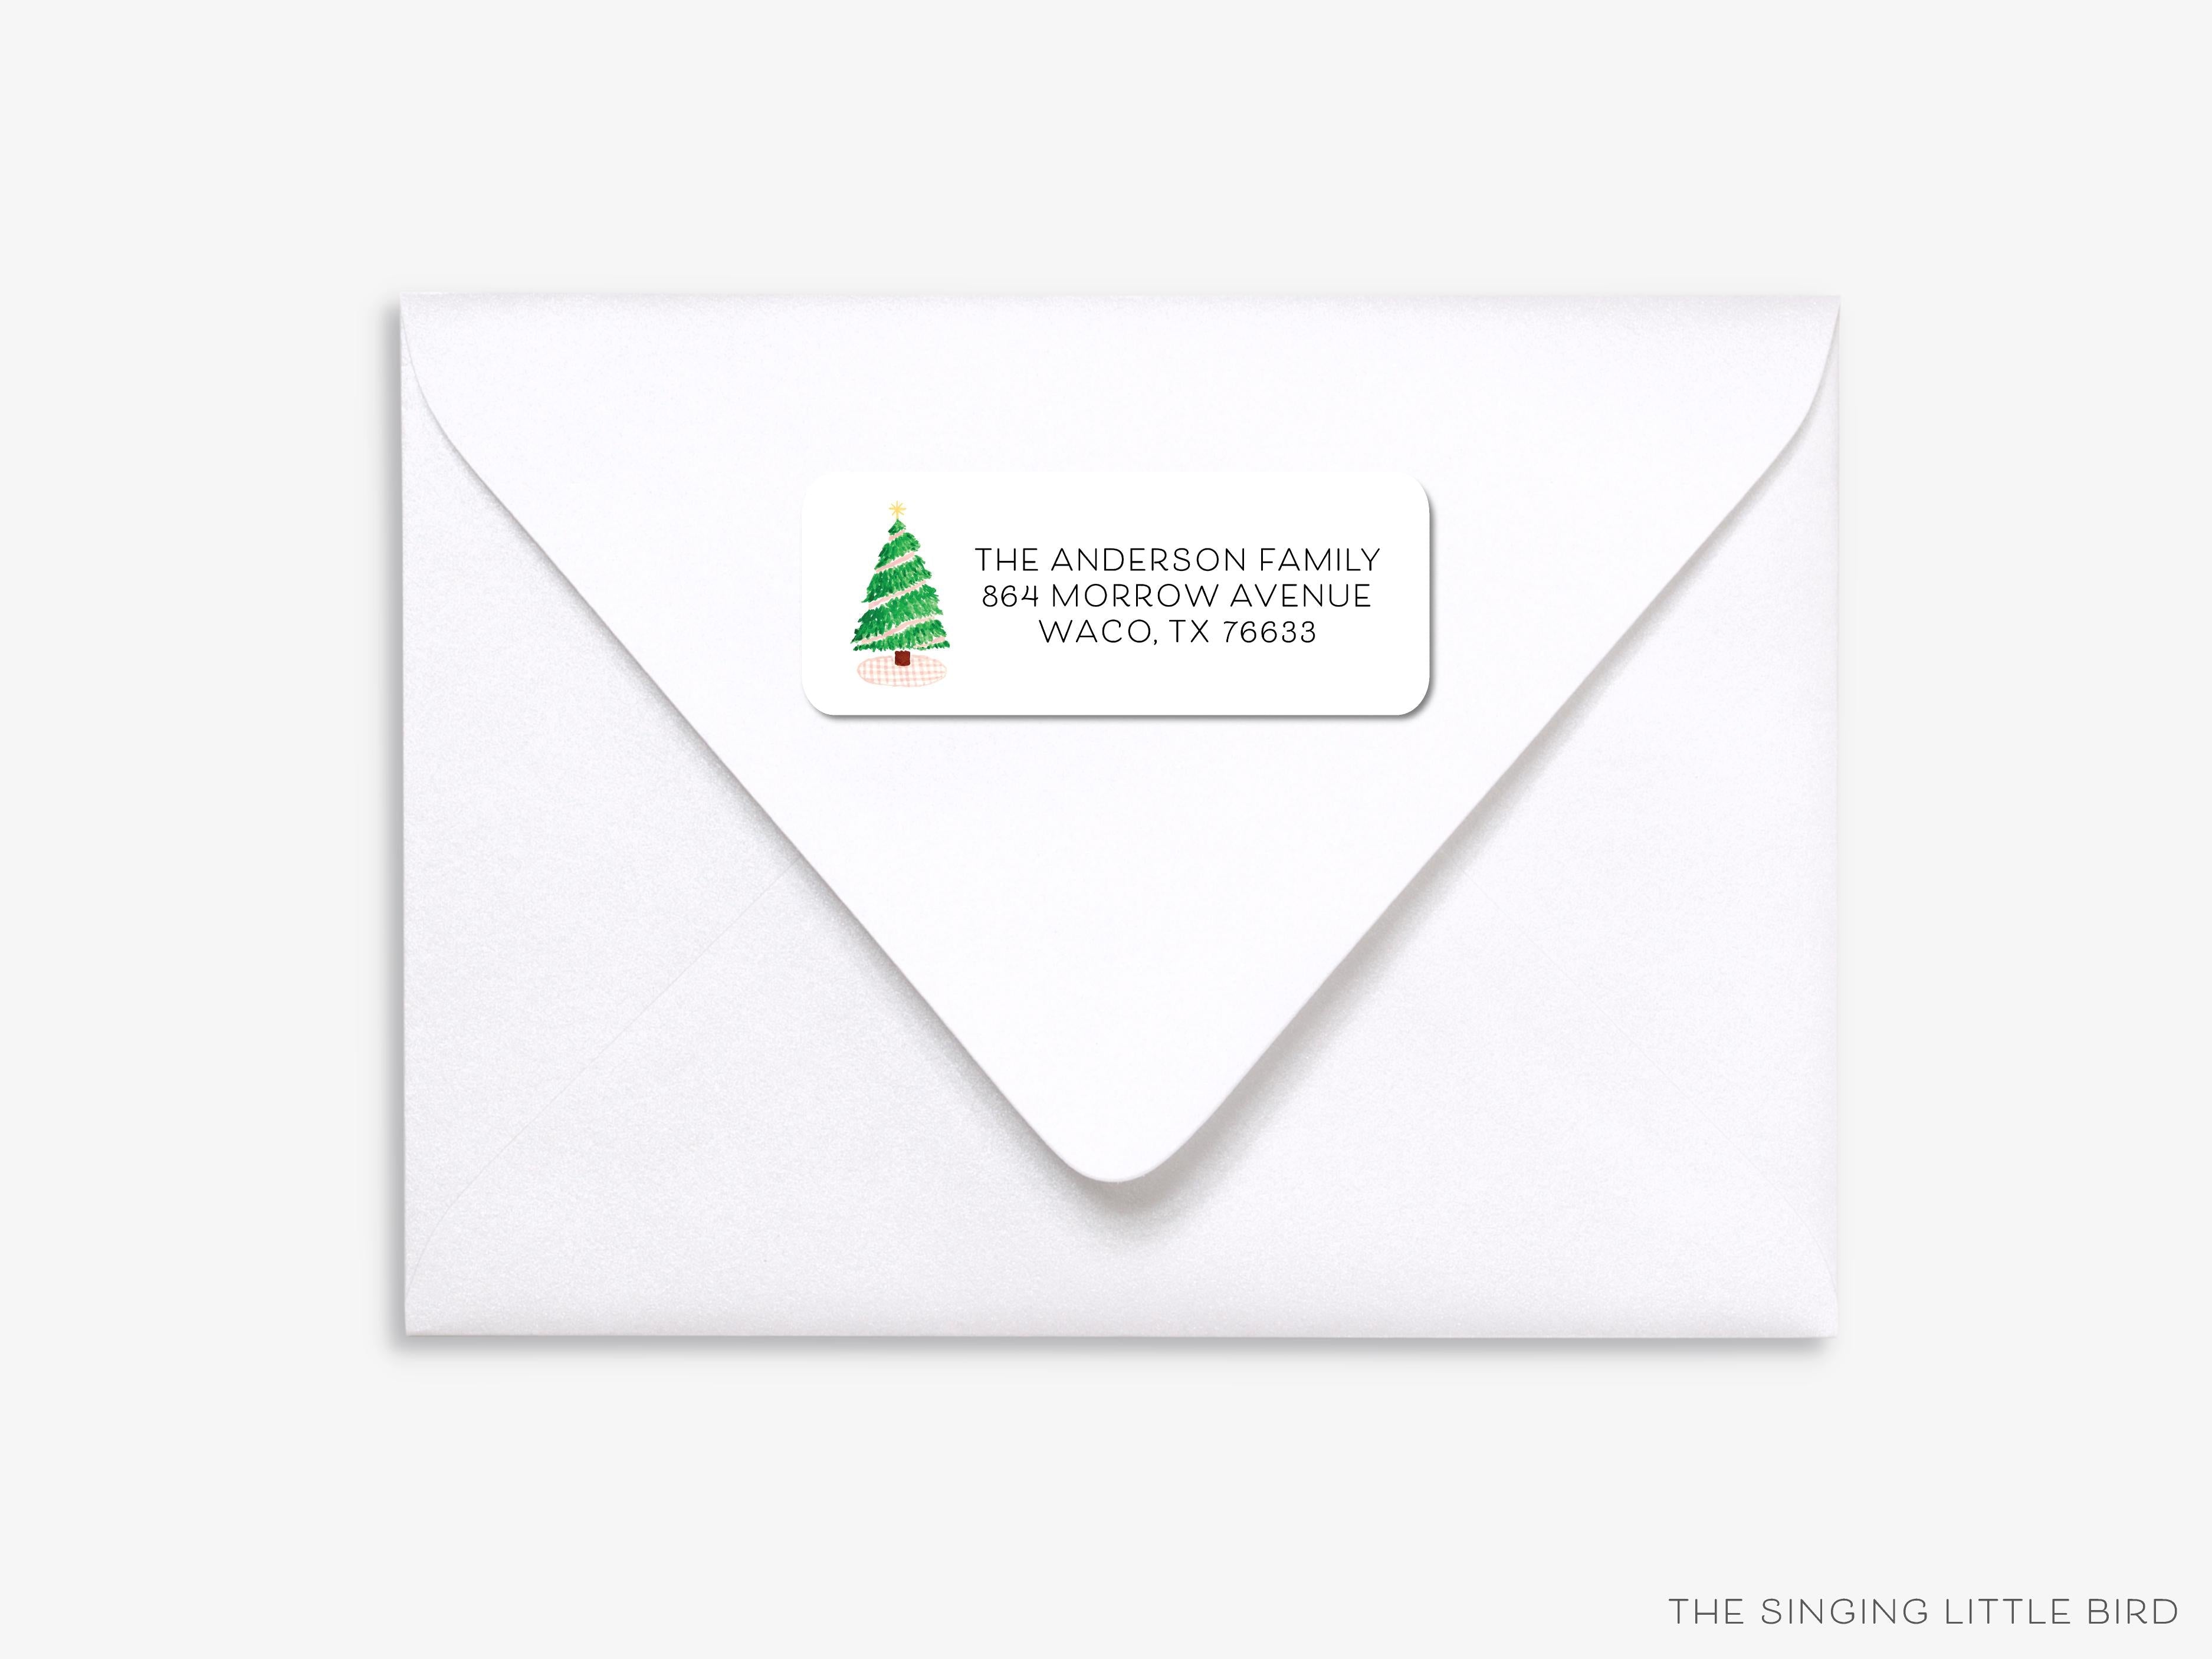 Pink Gingham Christmas Tree Return Address Labels-These personalized return address labels are 2.625" x 1" and feature our hand-painted watercolor Christmas Tree and Pink Gingham, printed in the USA on beautiful matte finish labels. These make great gifts for yourself or the Christmas tree lover.-The Singing Little Bird